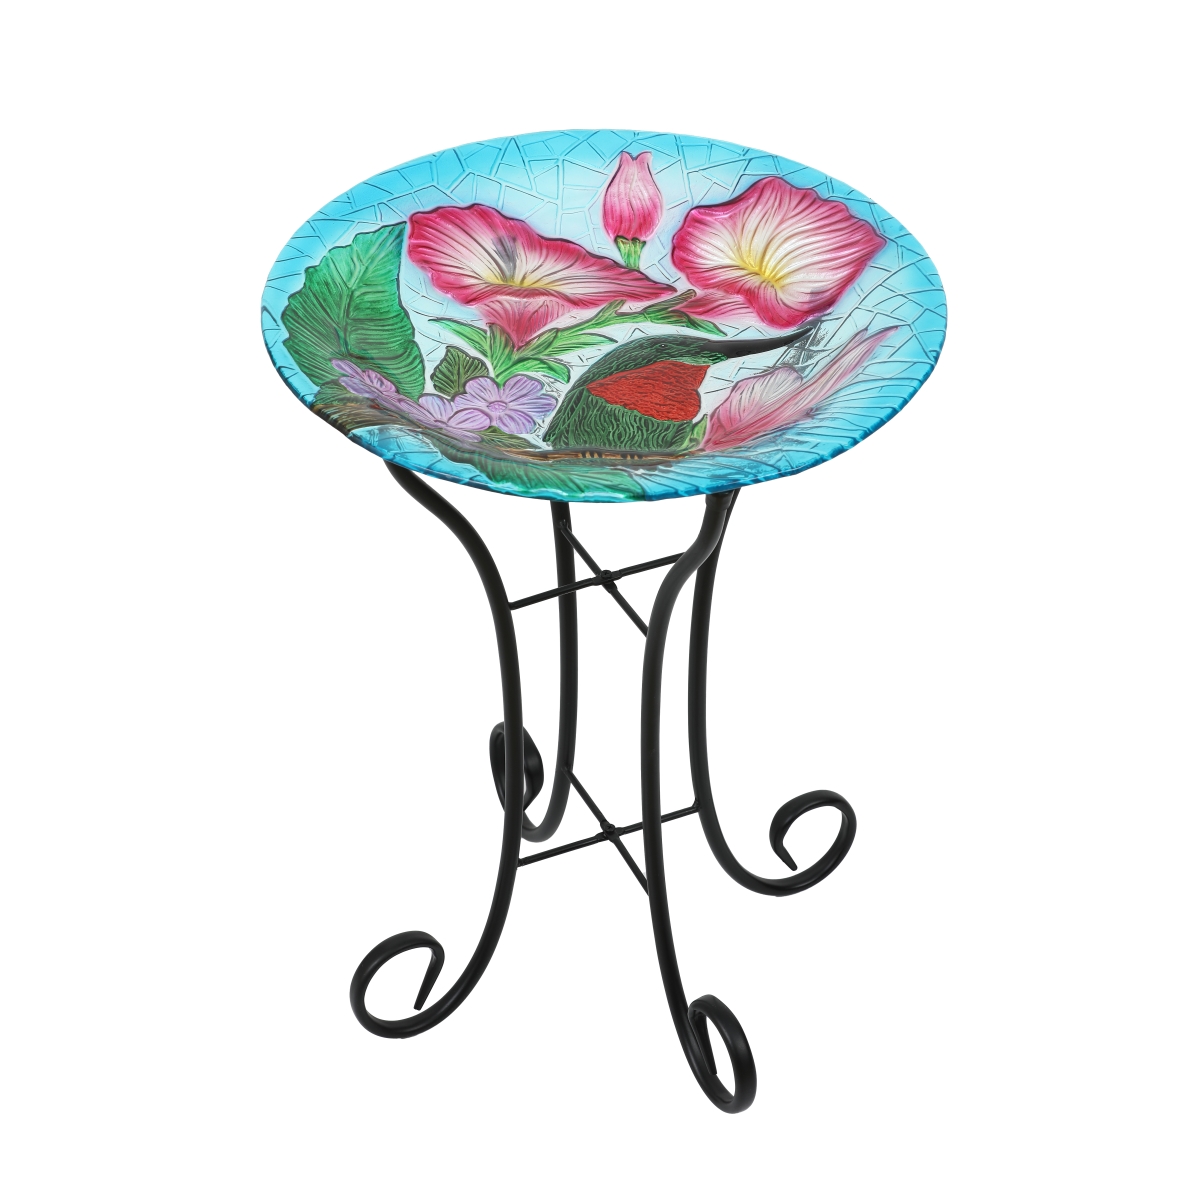 Picture of Luxen Home WHP1521 Hummingbird Floral Glass Bird Bath with Metal Stand